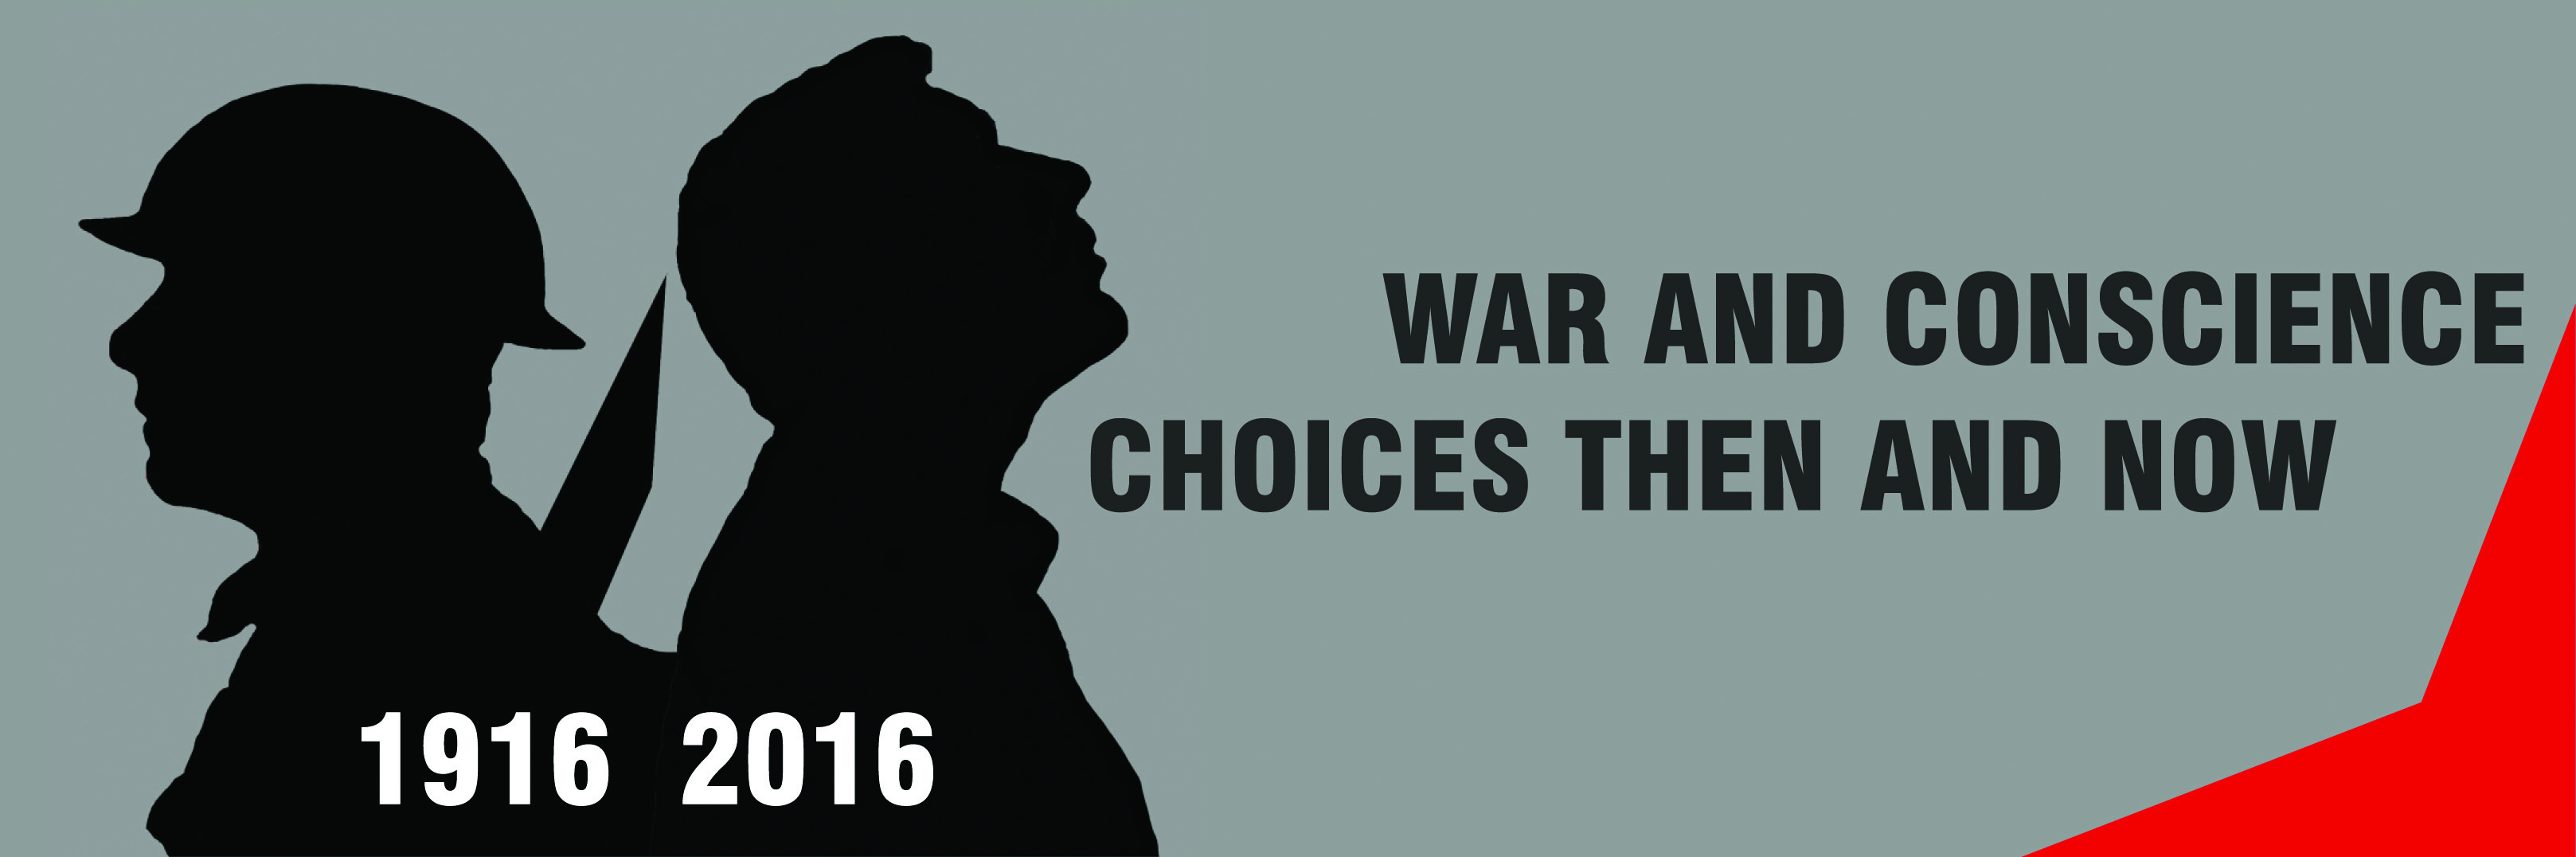 War and Conscience: Choices Then and Now